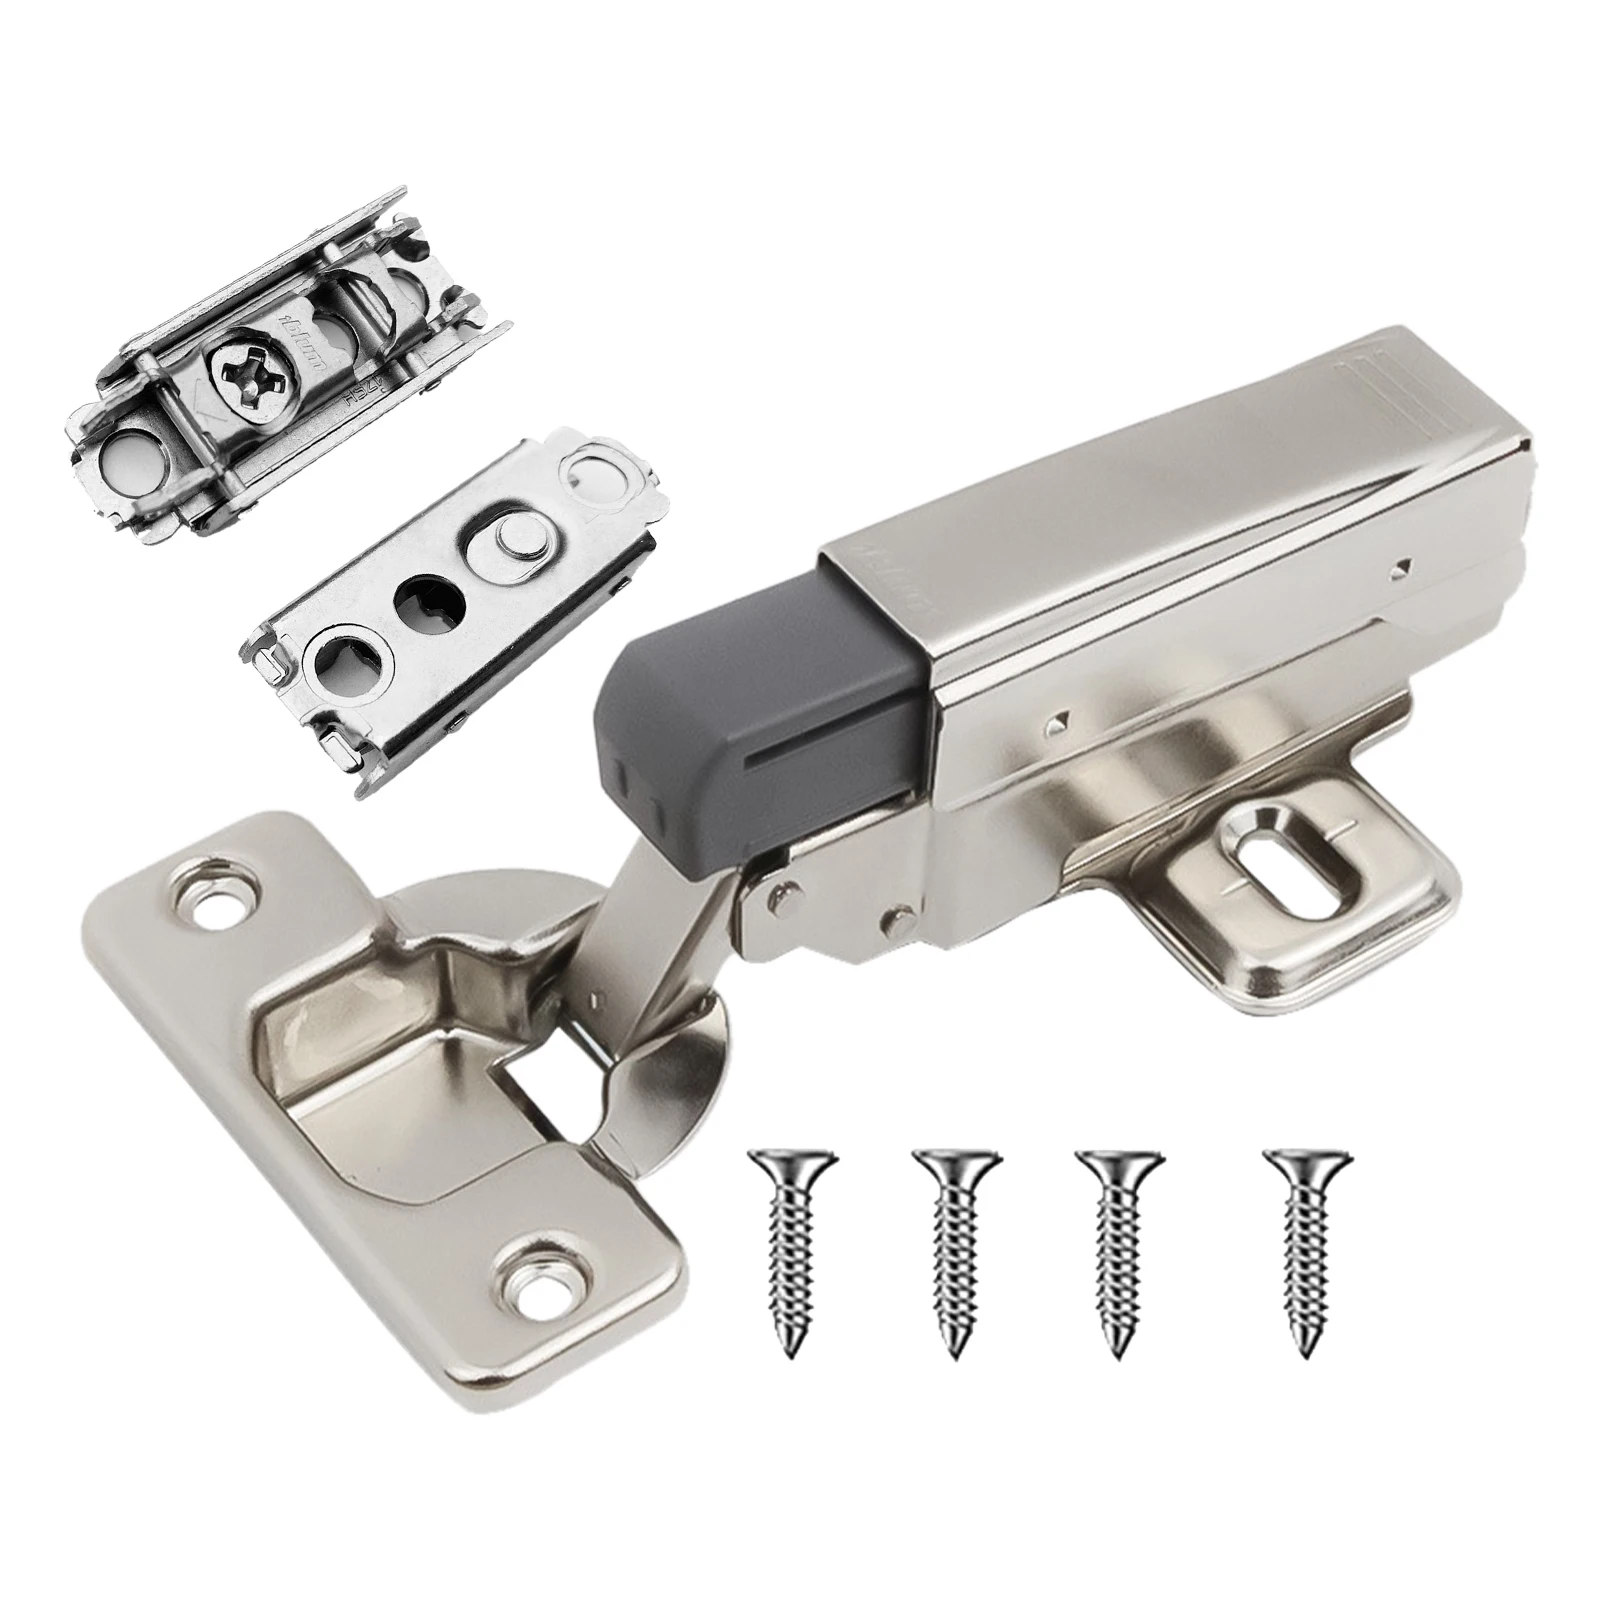 

Integrated Damping Hinges Hydraulic Buffer Standard Furniture Hinges With 100° Angle For Cabinet Door Internal Screw-fixed Hinge